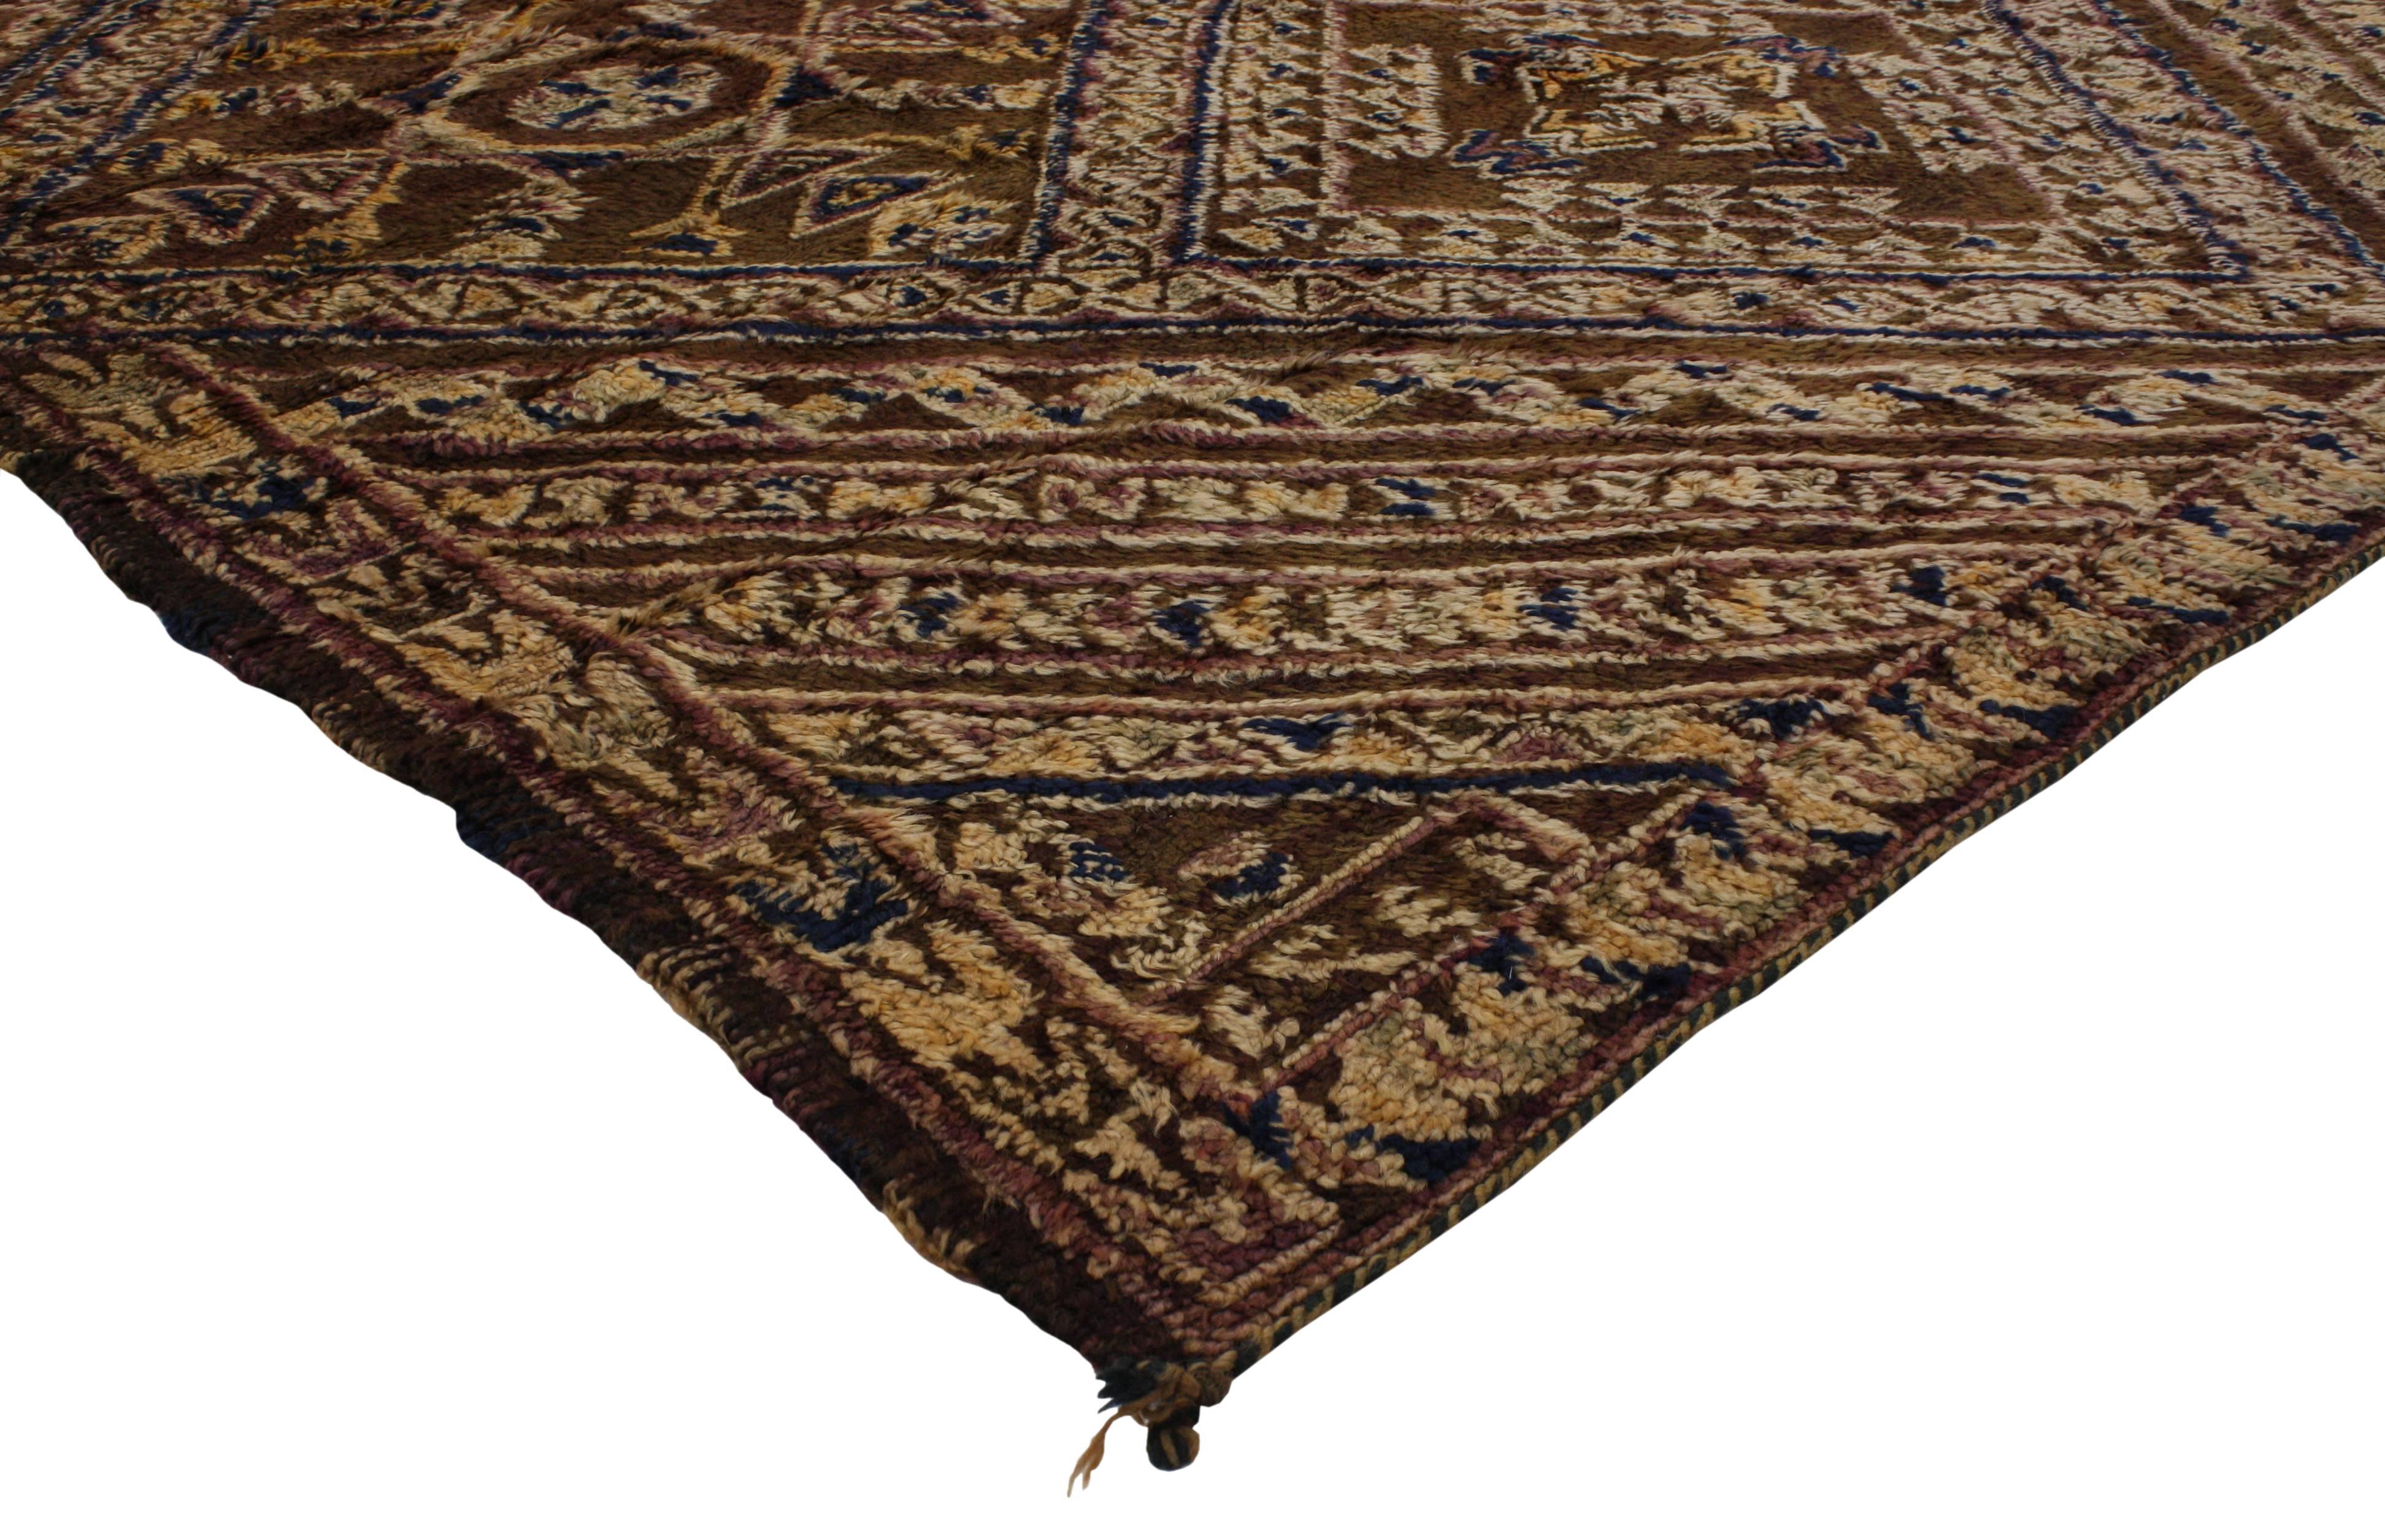 20121 Vintage Chocolate Beni M'Guild Moroccan Rug with Biophilic Design and Tribal Style, Brown Berber Moroccan Rug. With architectural biophilia elements combined naturalistic forms, this hand knotted wool vintage Beni M'Guild rug embodies